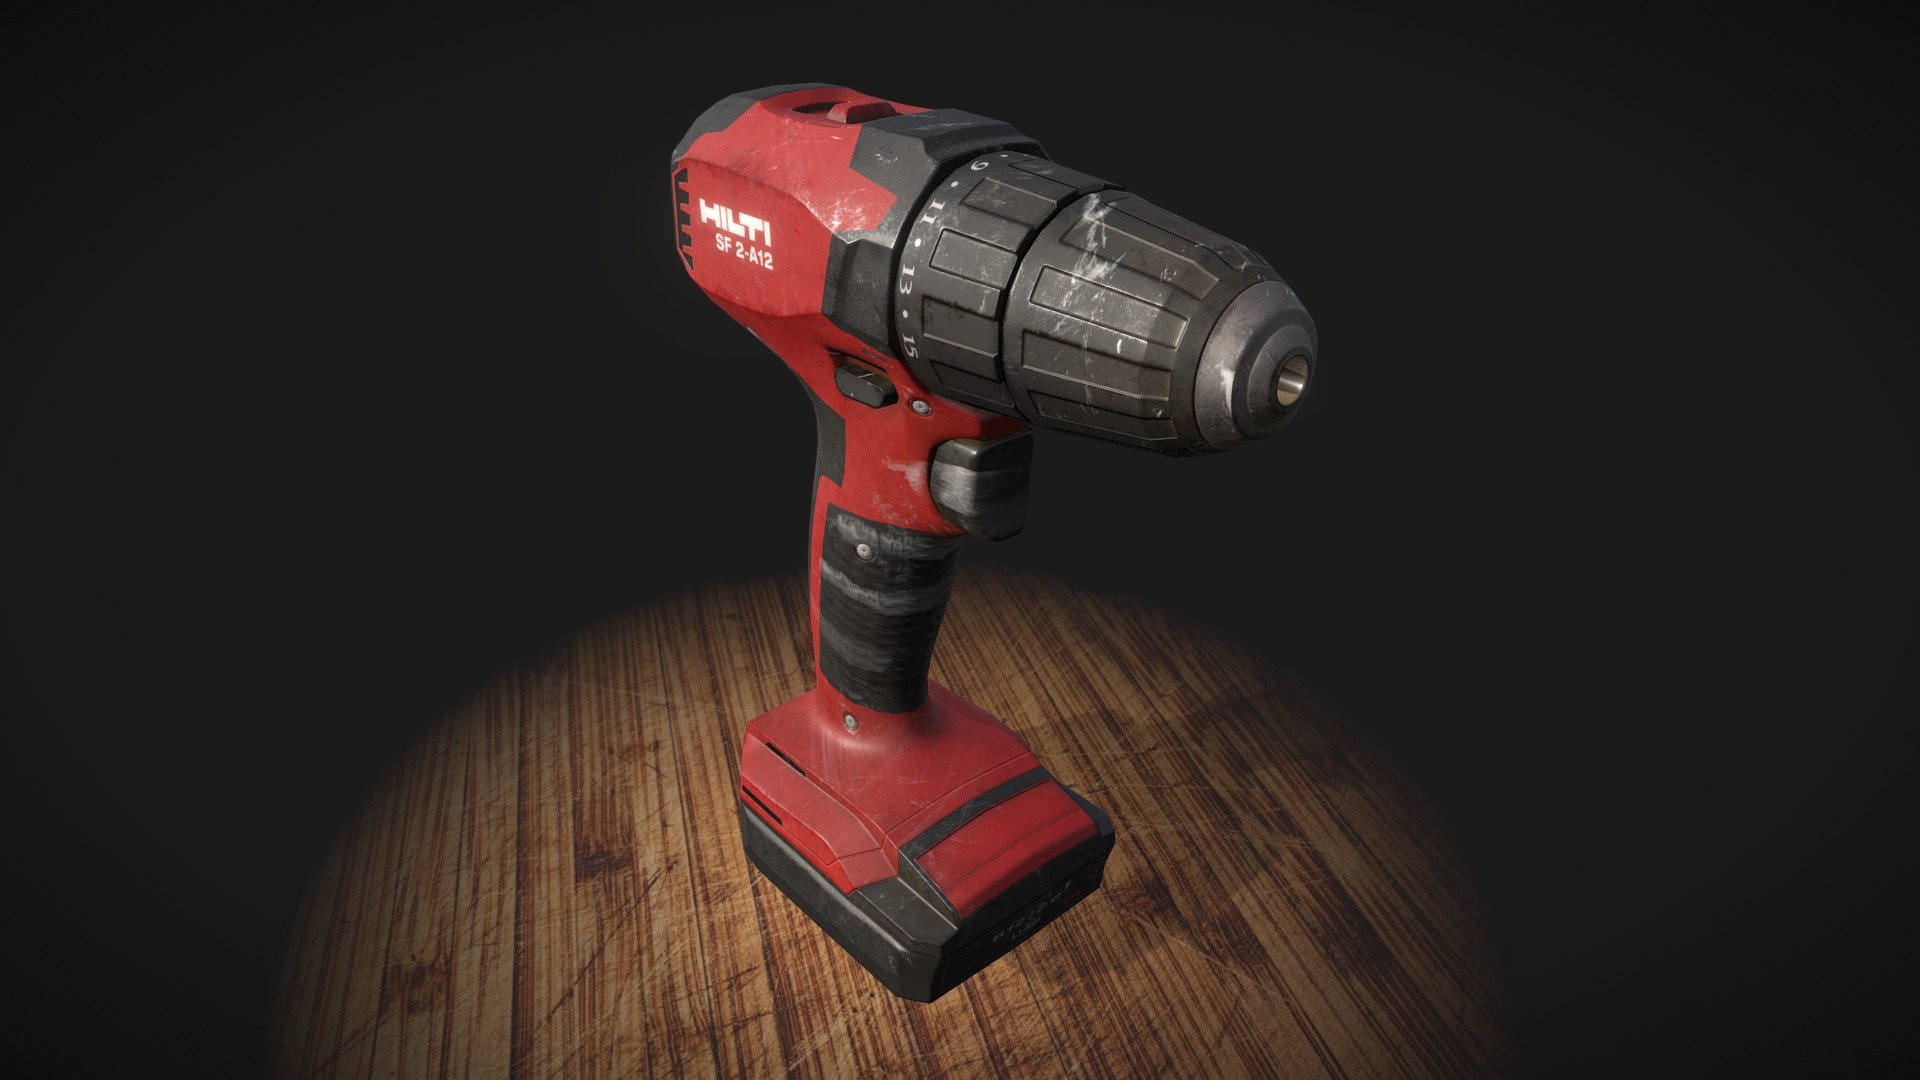 Hilti SF 2-A12.

I should have made a screwdriver. But when there is one thing my dad loves more than me it´s his hilti, so I gave it a shot. At some point I was too deep in to turn back 3d model